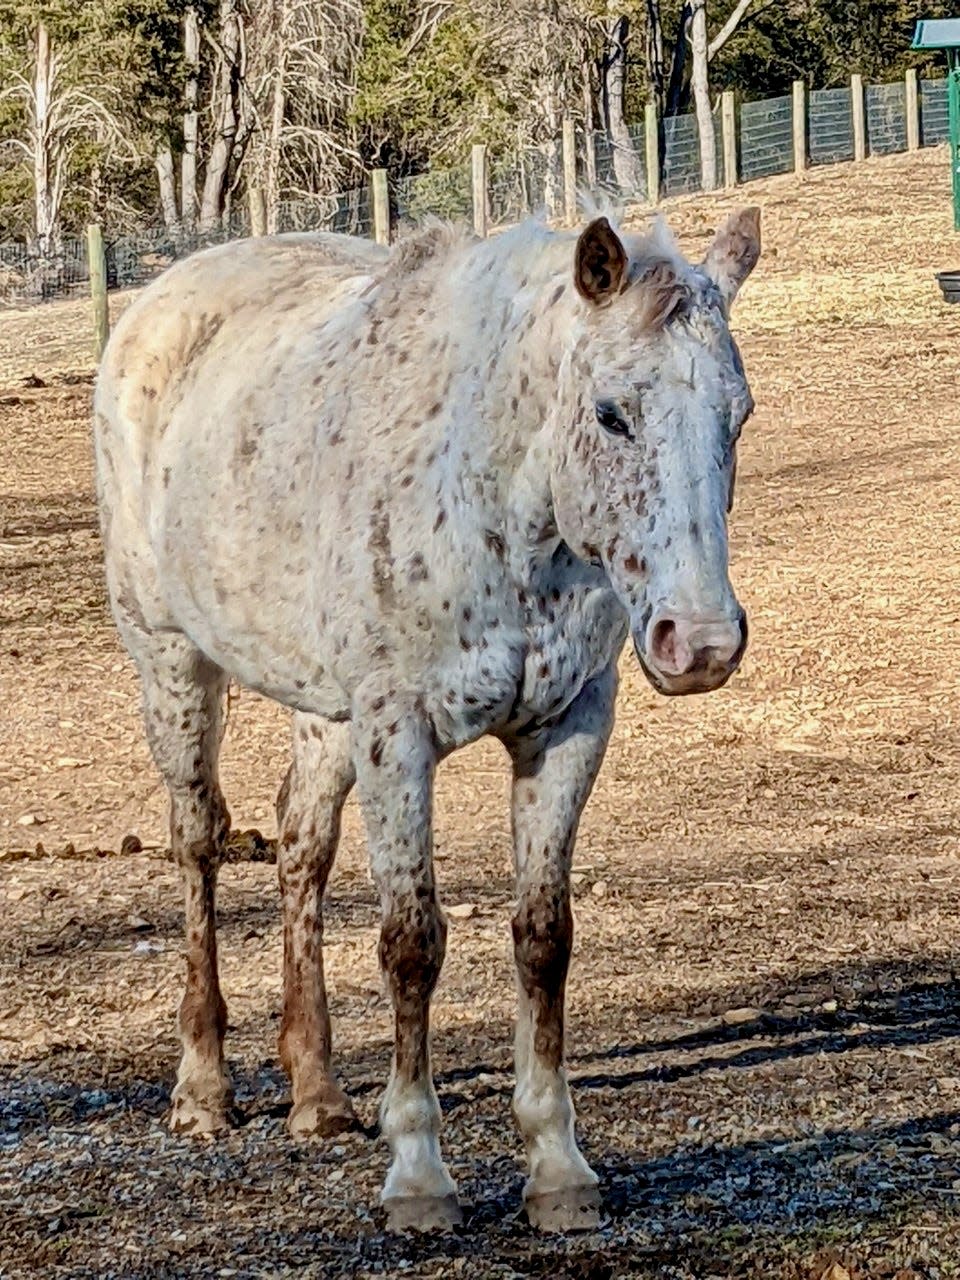 A recent picture of Iris, now "fat and happy" at a Clear Spring-area farm, said Karen Martin. Martin, who notified the Humane Society of Washington County of Iris' poor condition at another farm in May 2021, adopted the horse.